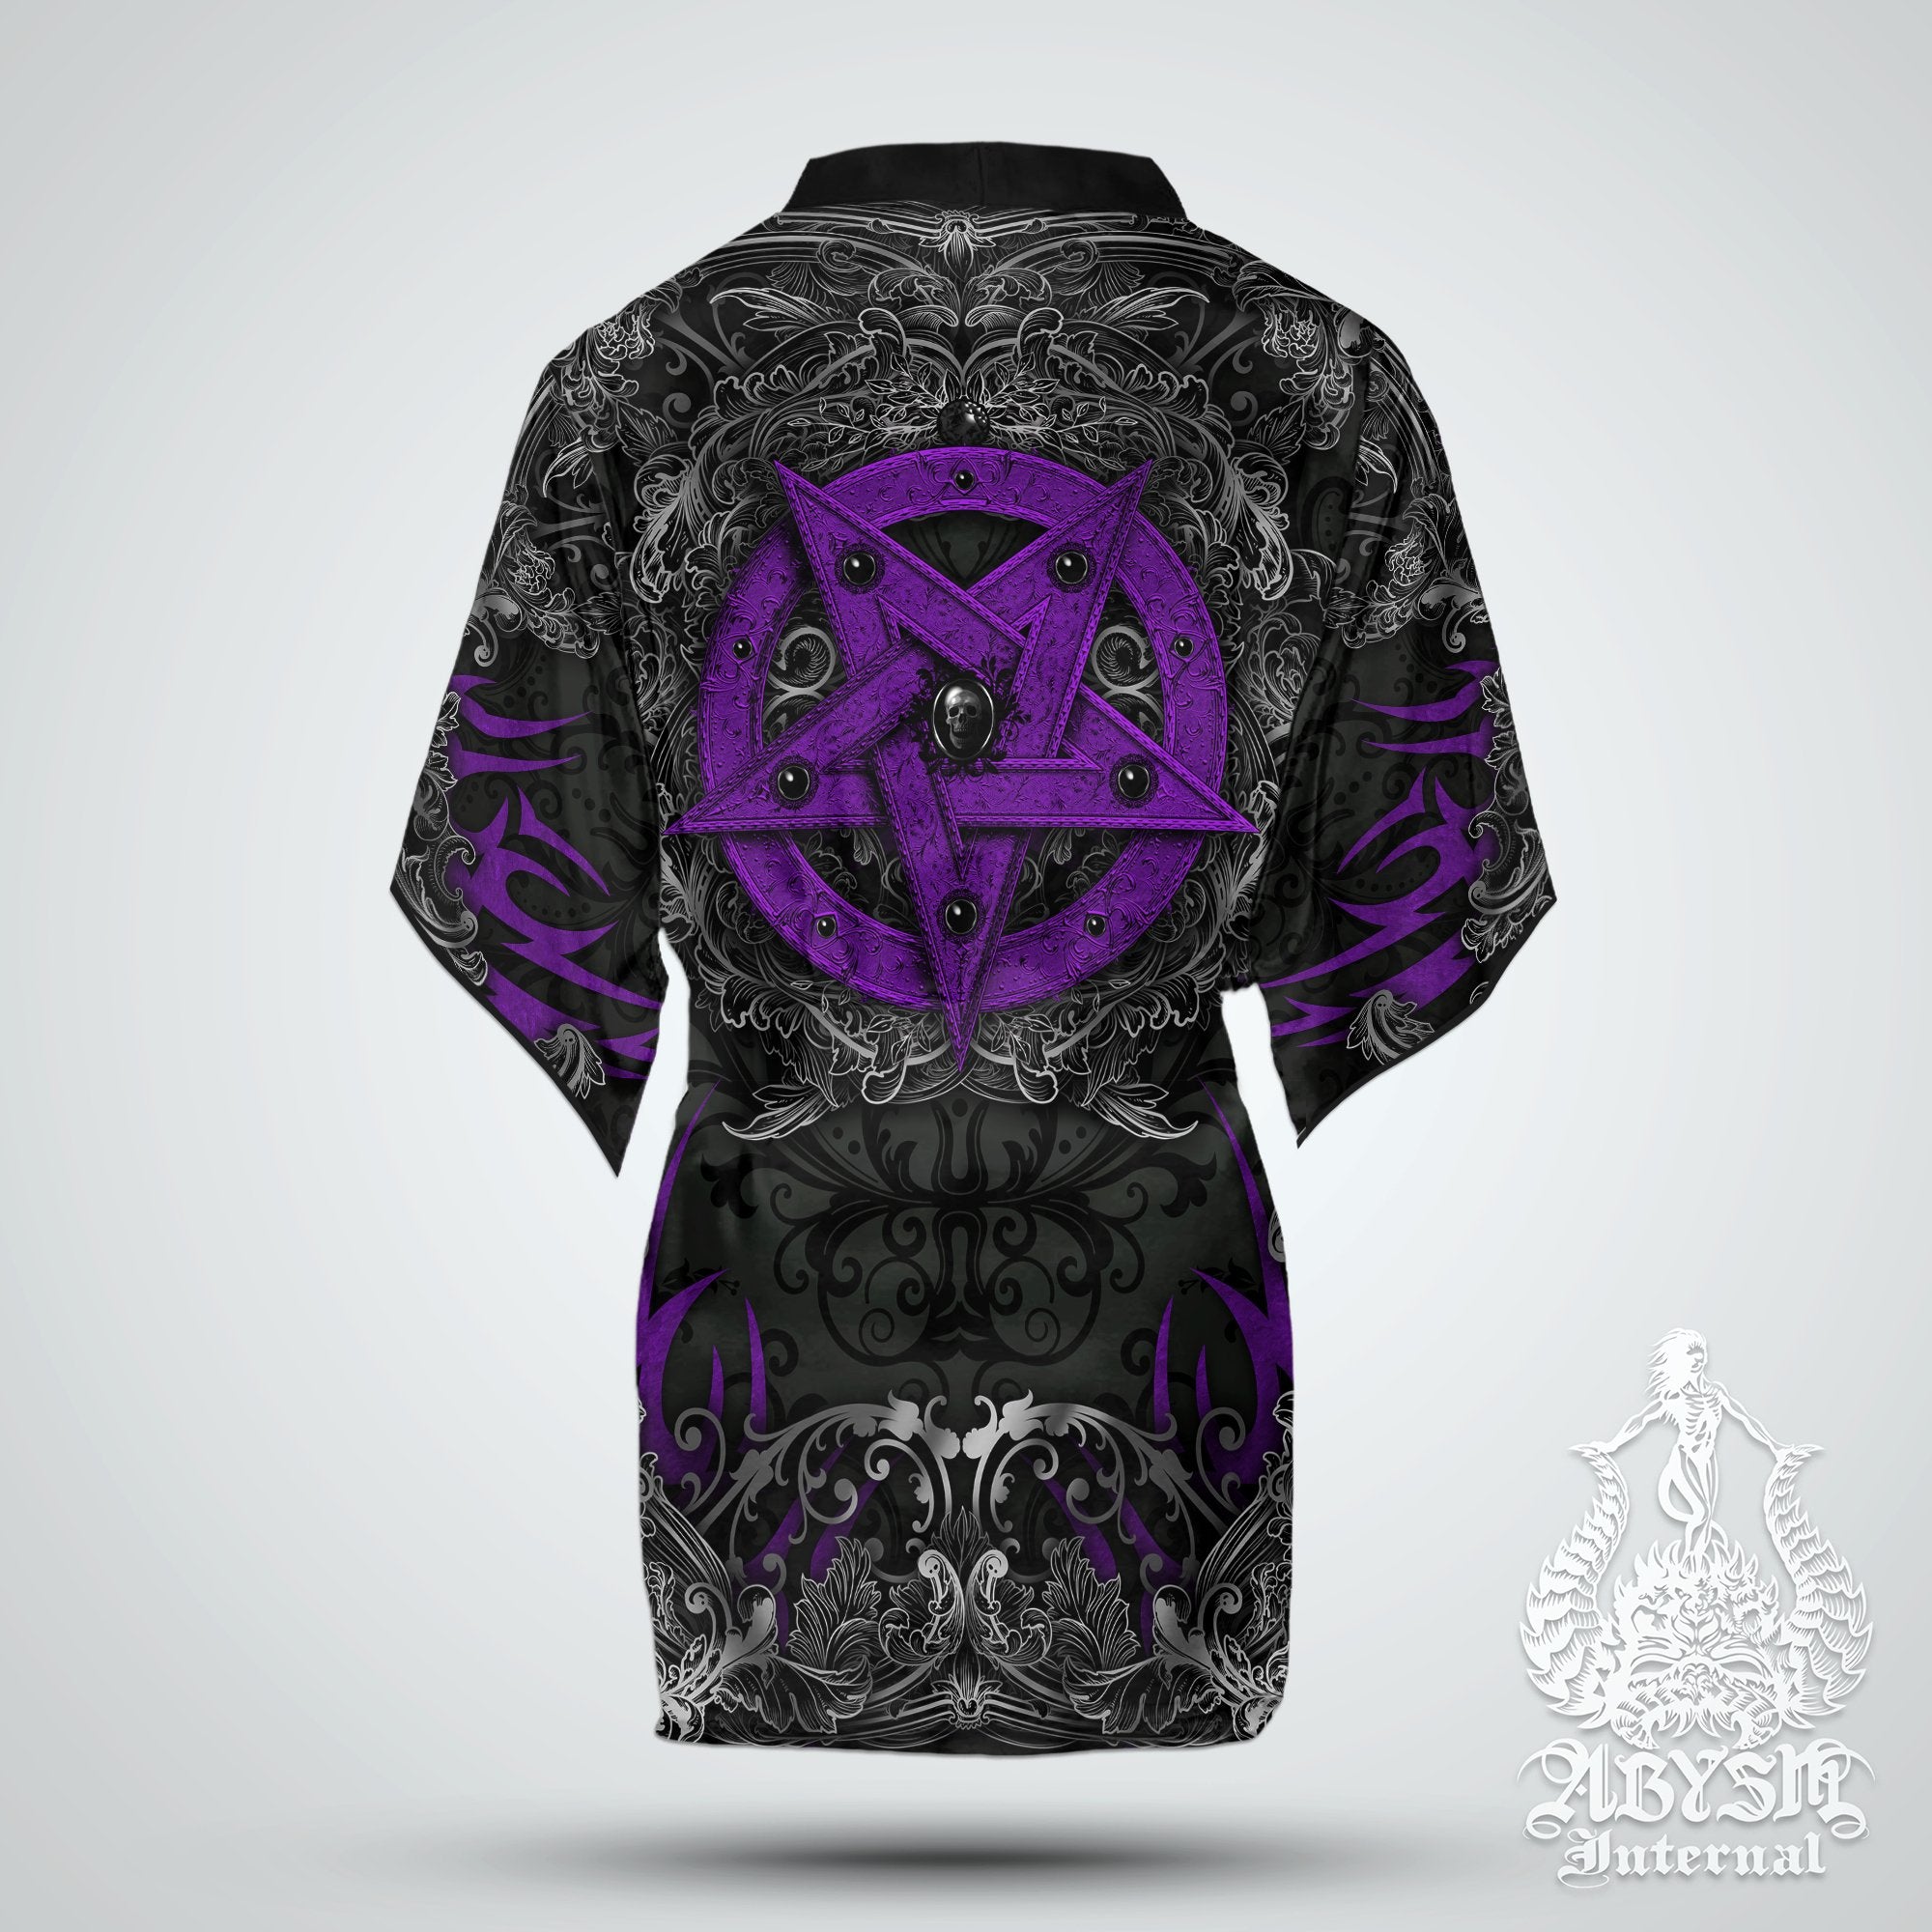 Pentagram Short Kimono Robe, Pastel Goth Beach Party Outfit, Black Purple Coverup, Gothic Witch Summer Festival, Witchy Clothing, Unisex - Abysm Internal